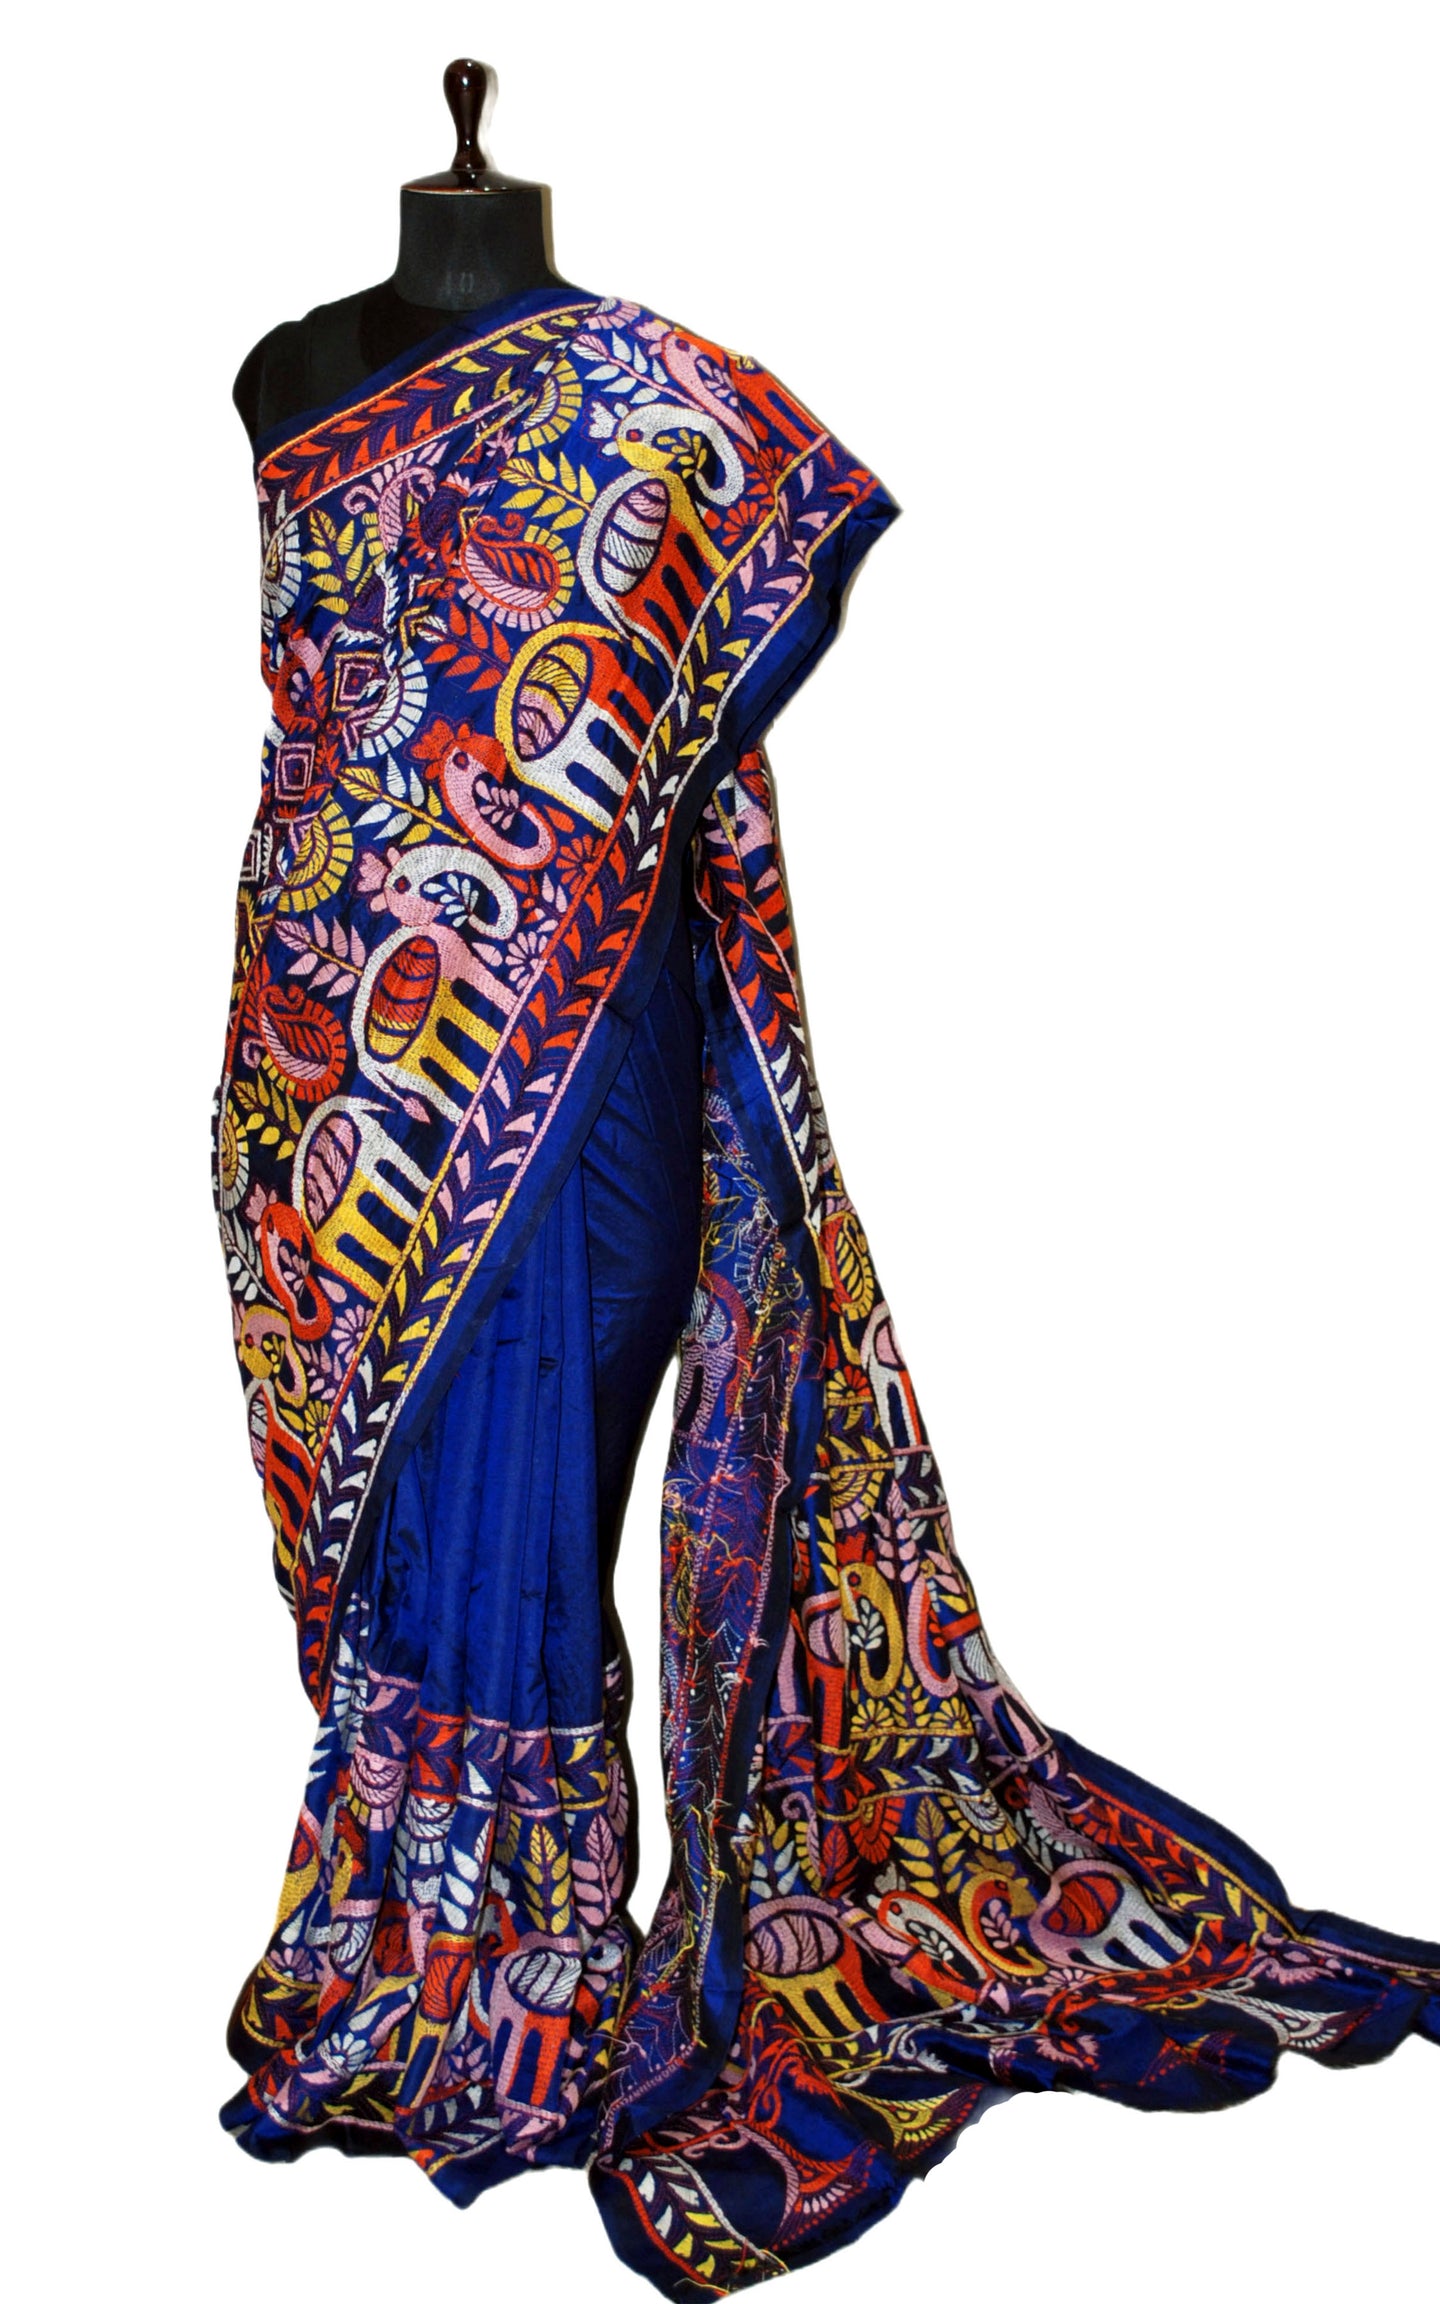 Pure Silk Hand Embroidery Kantha Stitch Saree in Prussian Blue and Multicolored Thread Work